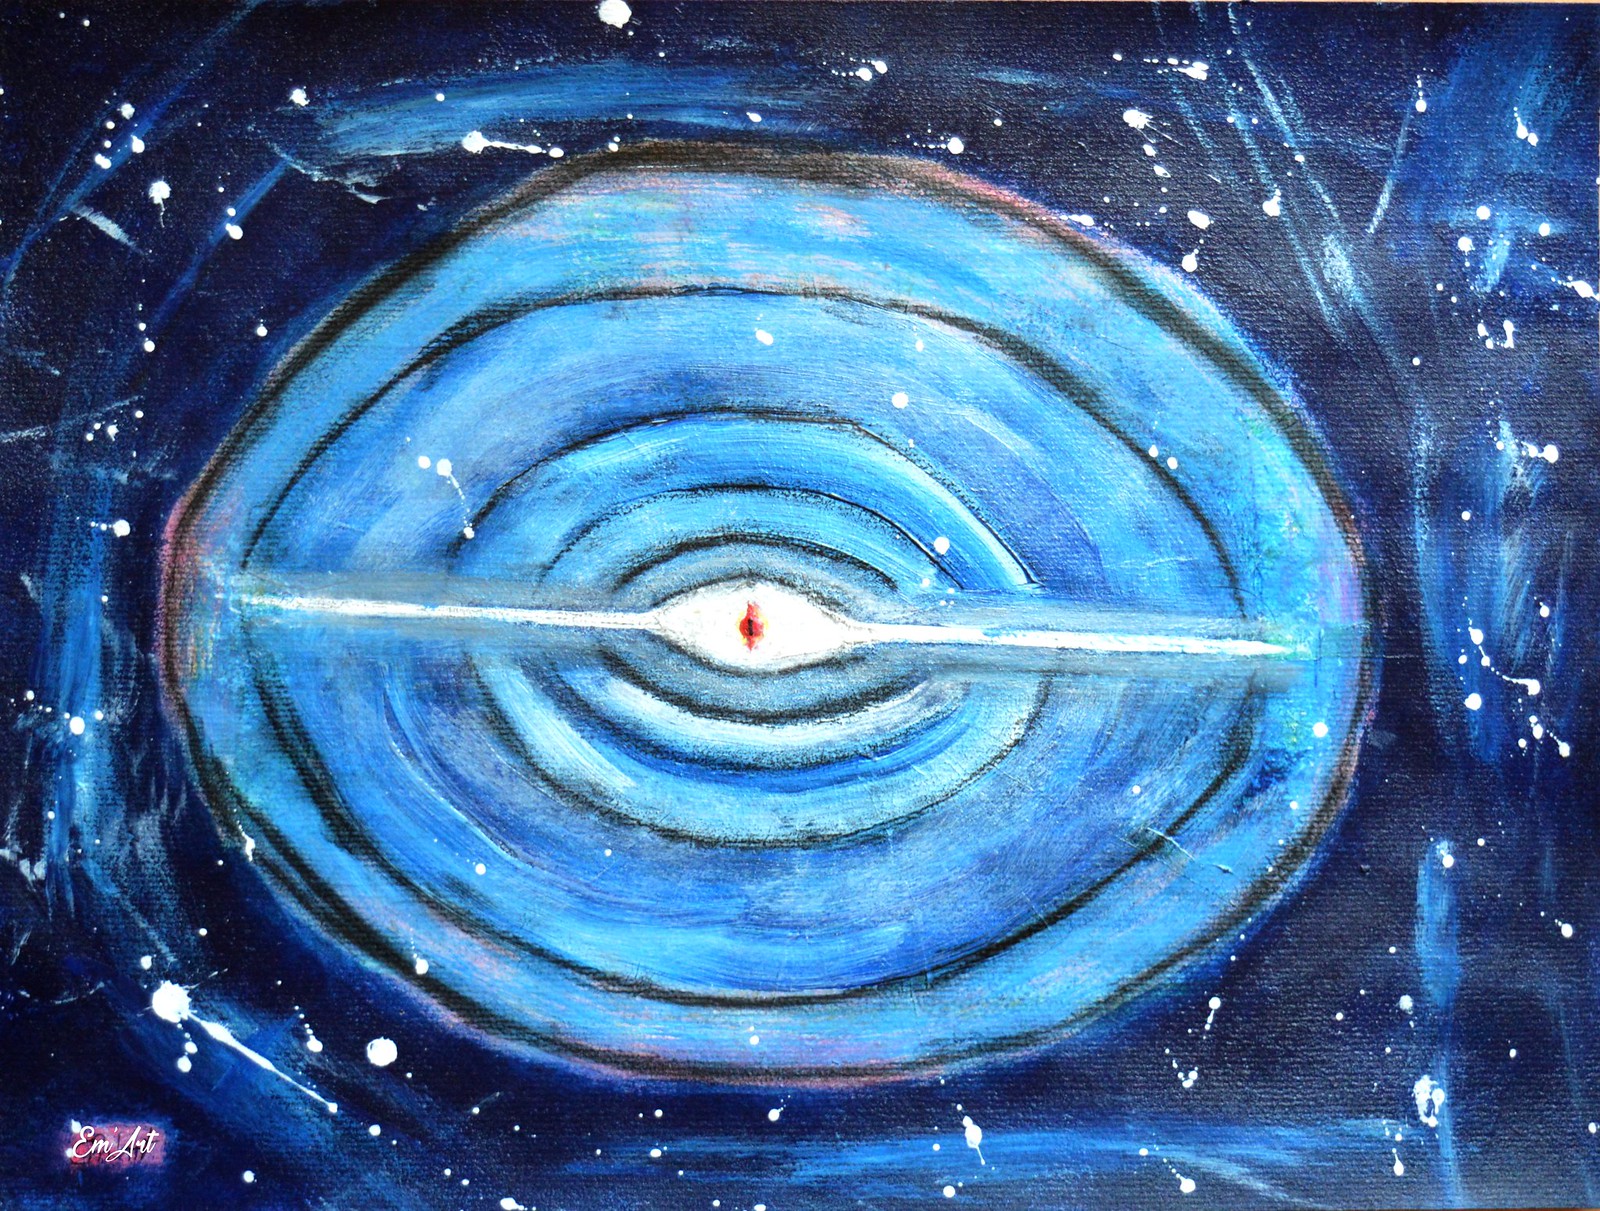 God's Eye, surreal galactic painting on paper by Emmanuelle Baudry